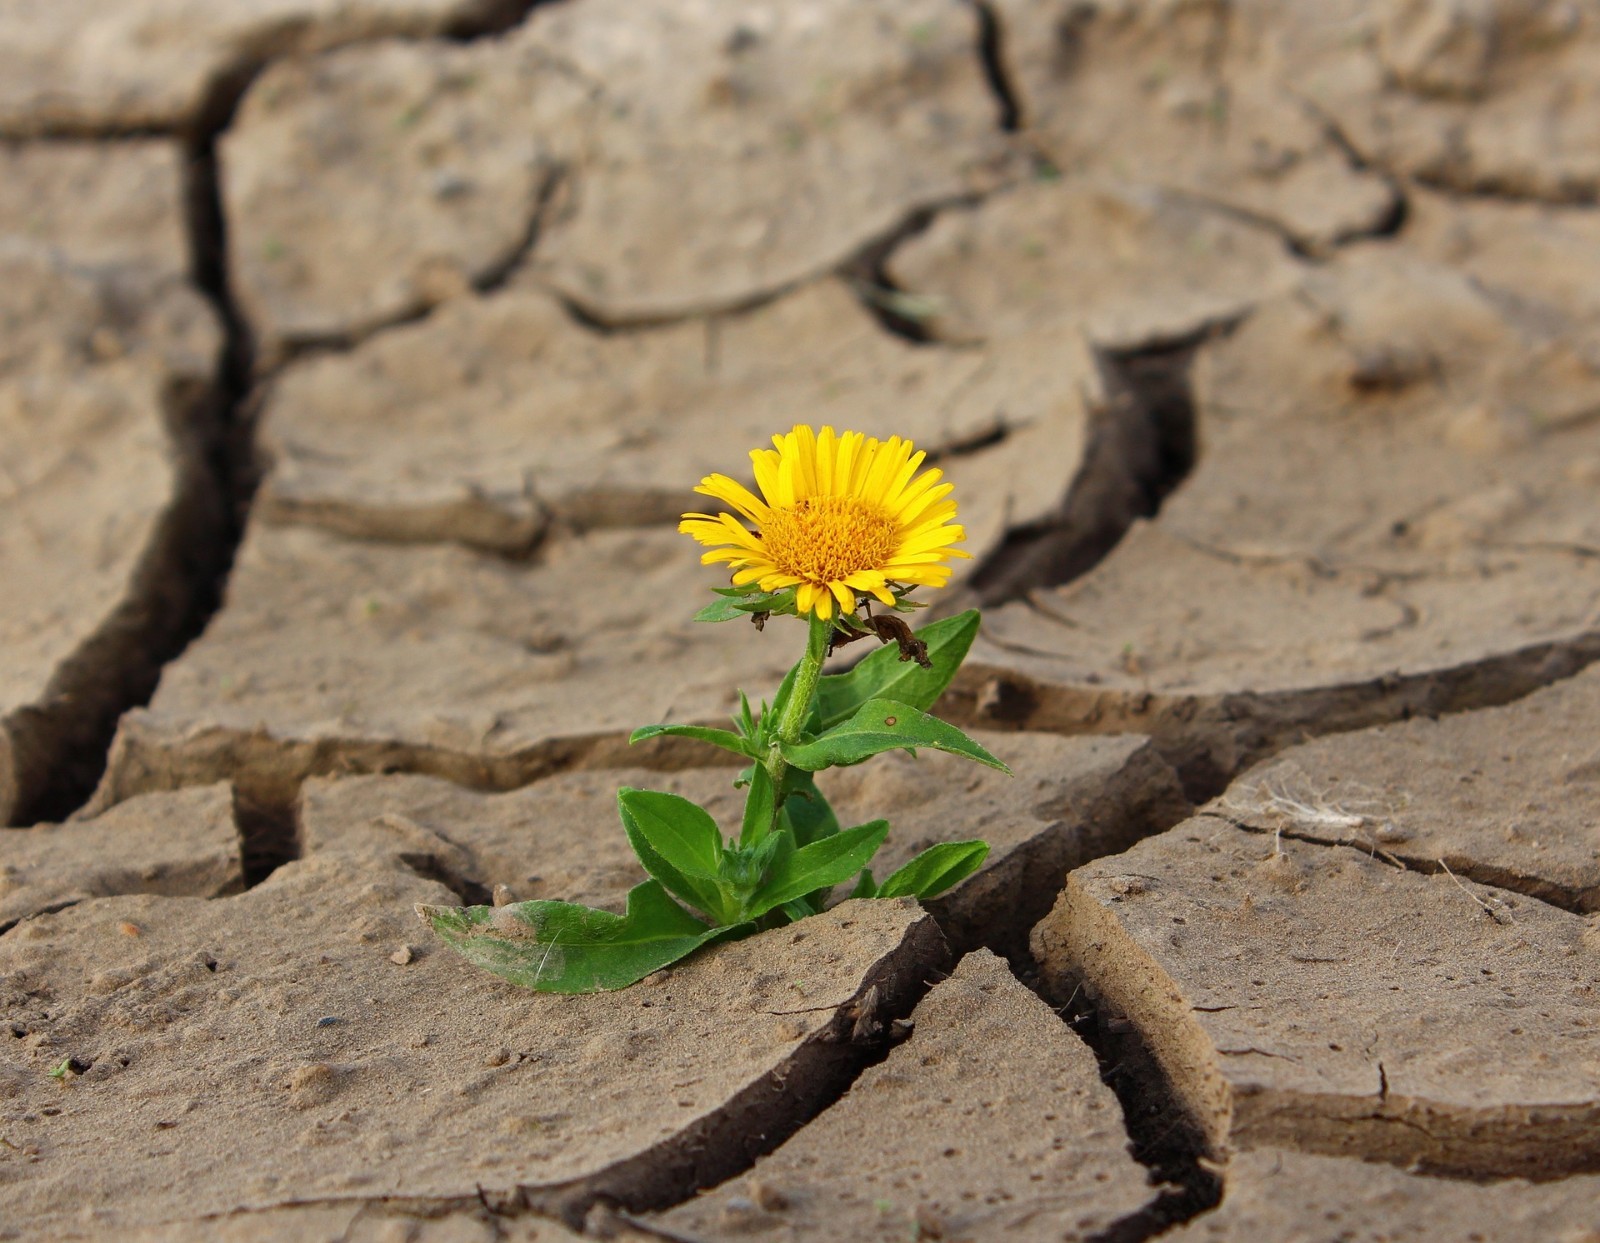 A picture shows a flower in a dry field.